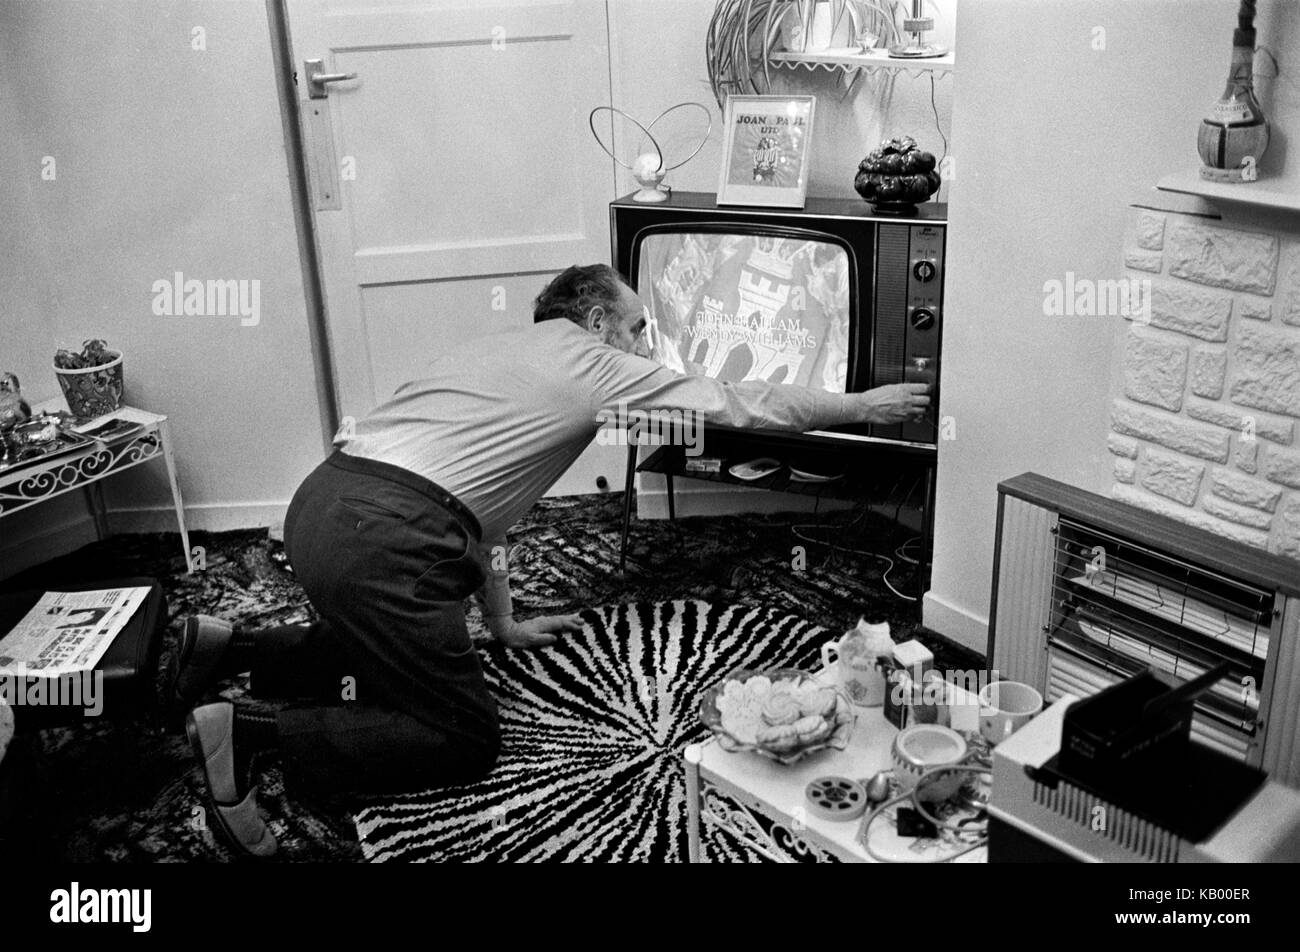 Family at home London 1970s in living room interior tuning in TV  changing channel to watch watching The Regiment staring John Hallam  and Wendy Williams 1972 UK HOMER SYKES Stock Photo